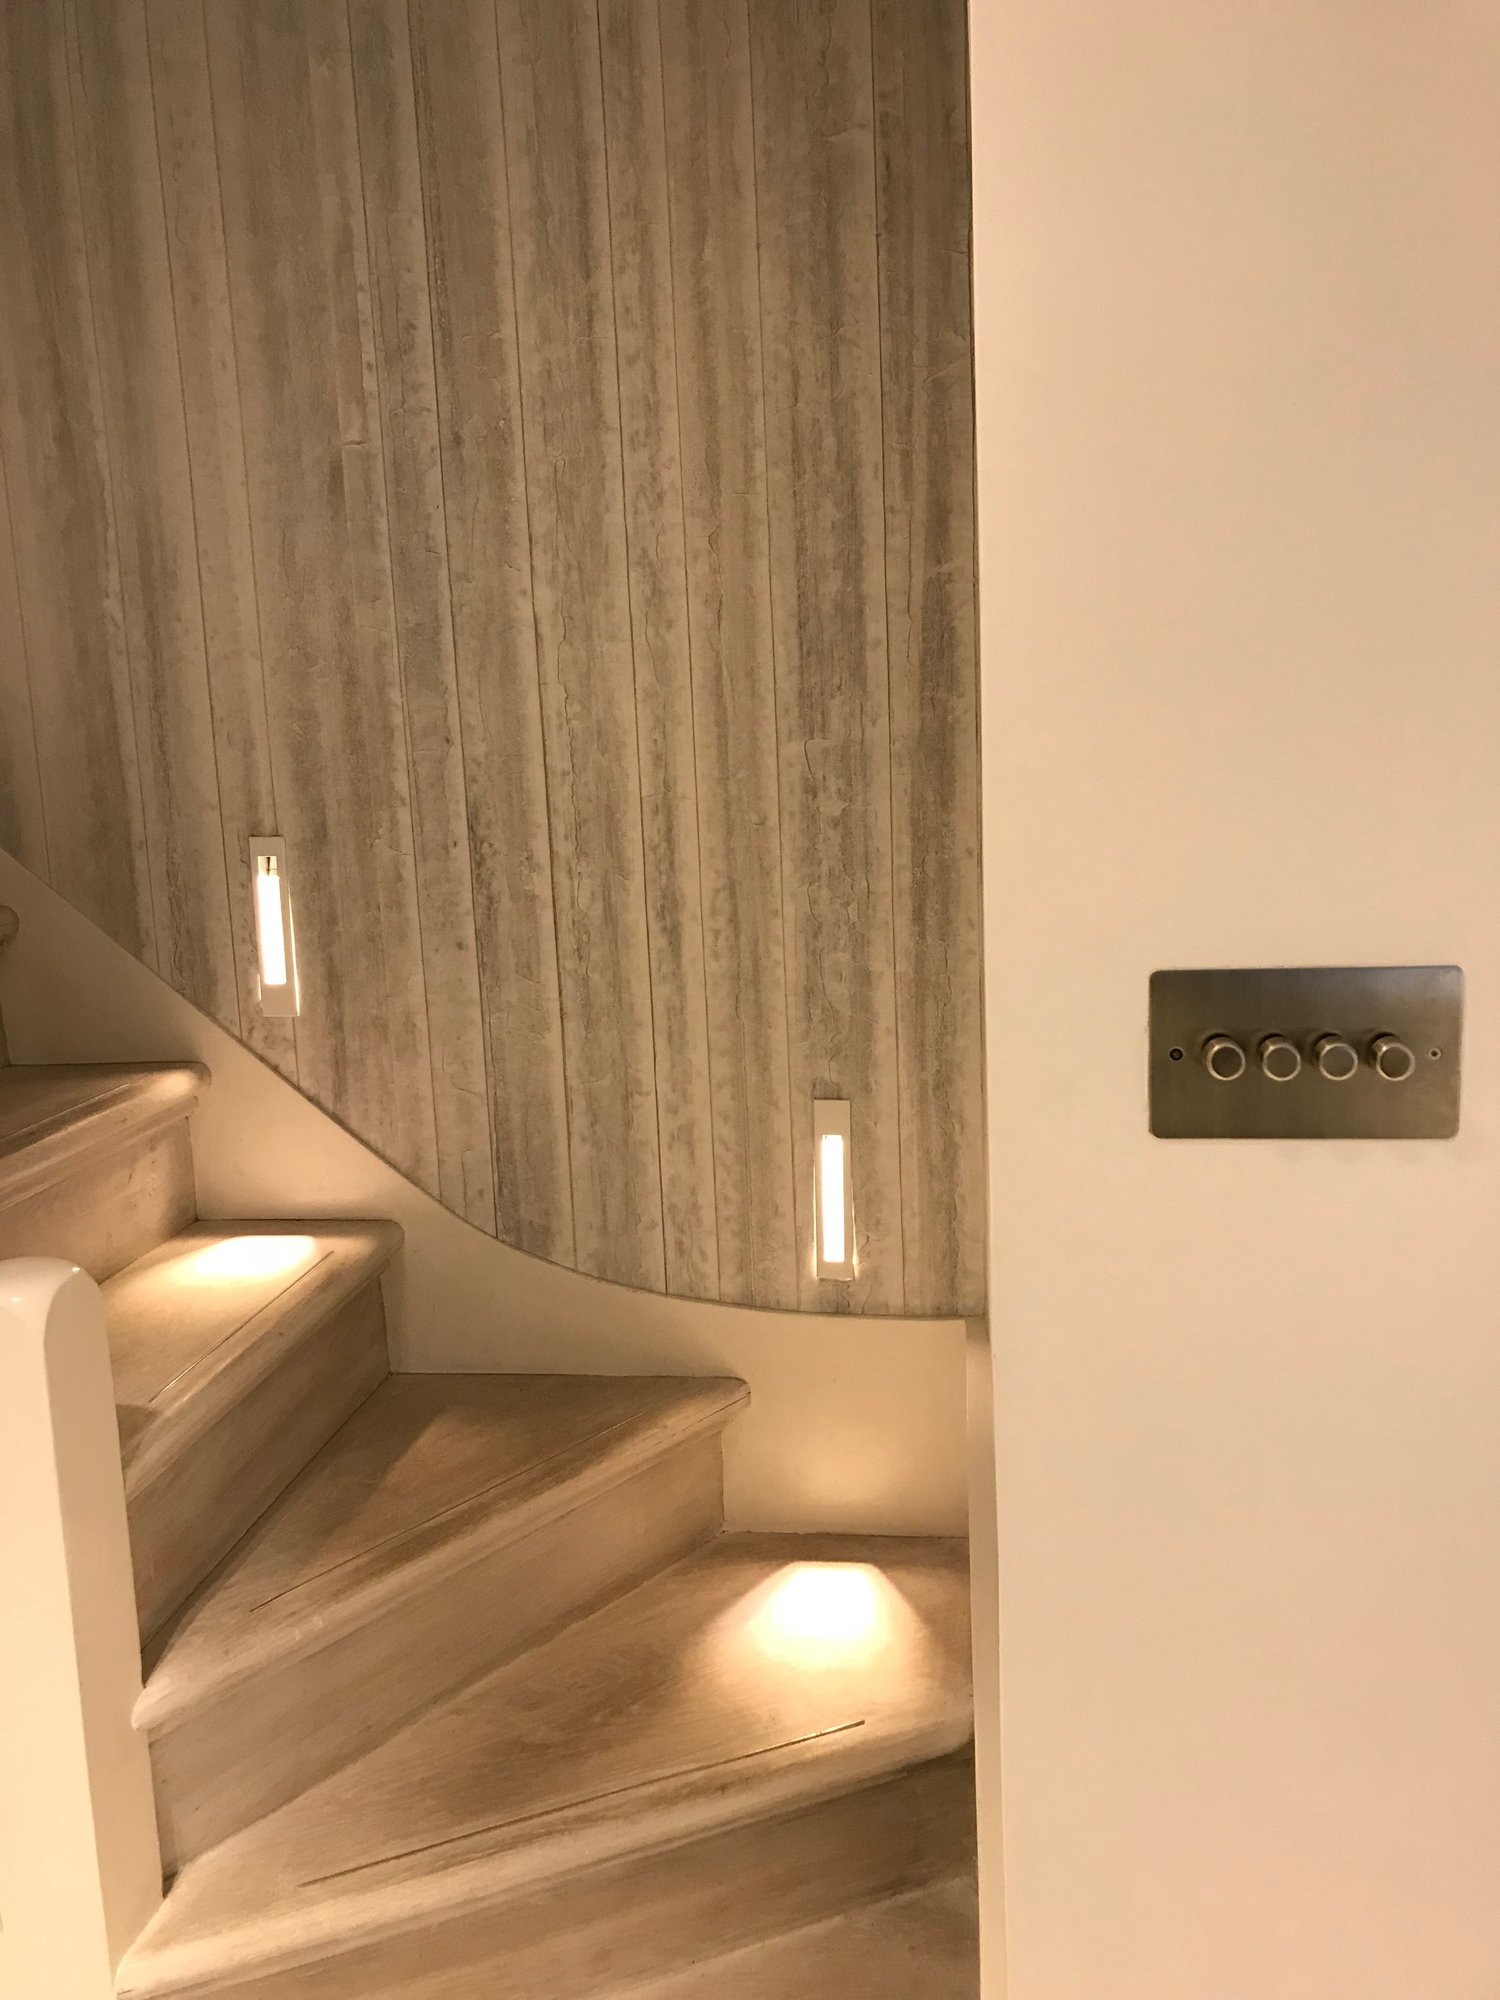 Staircase with LED lights on each step and modern lightswitch next to staircase